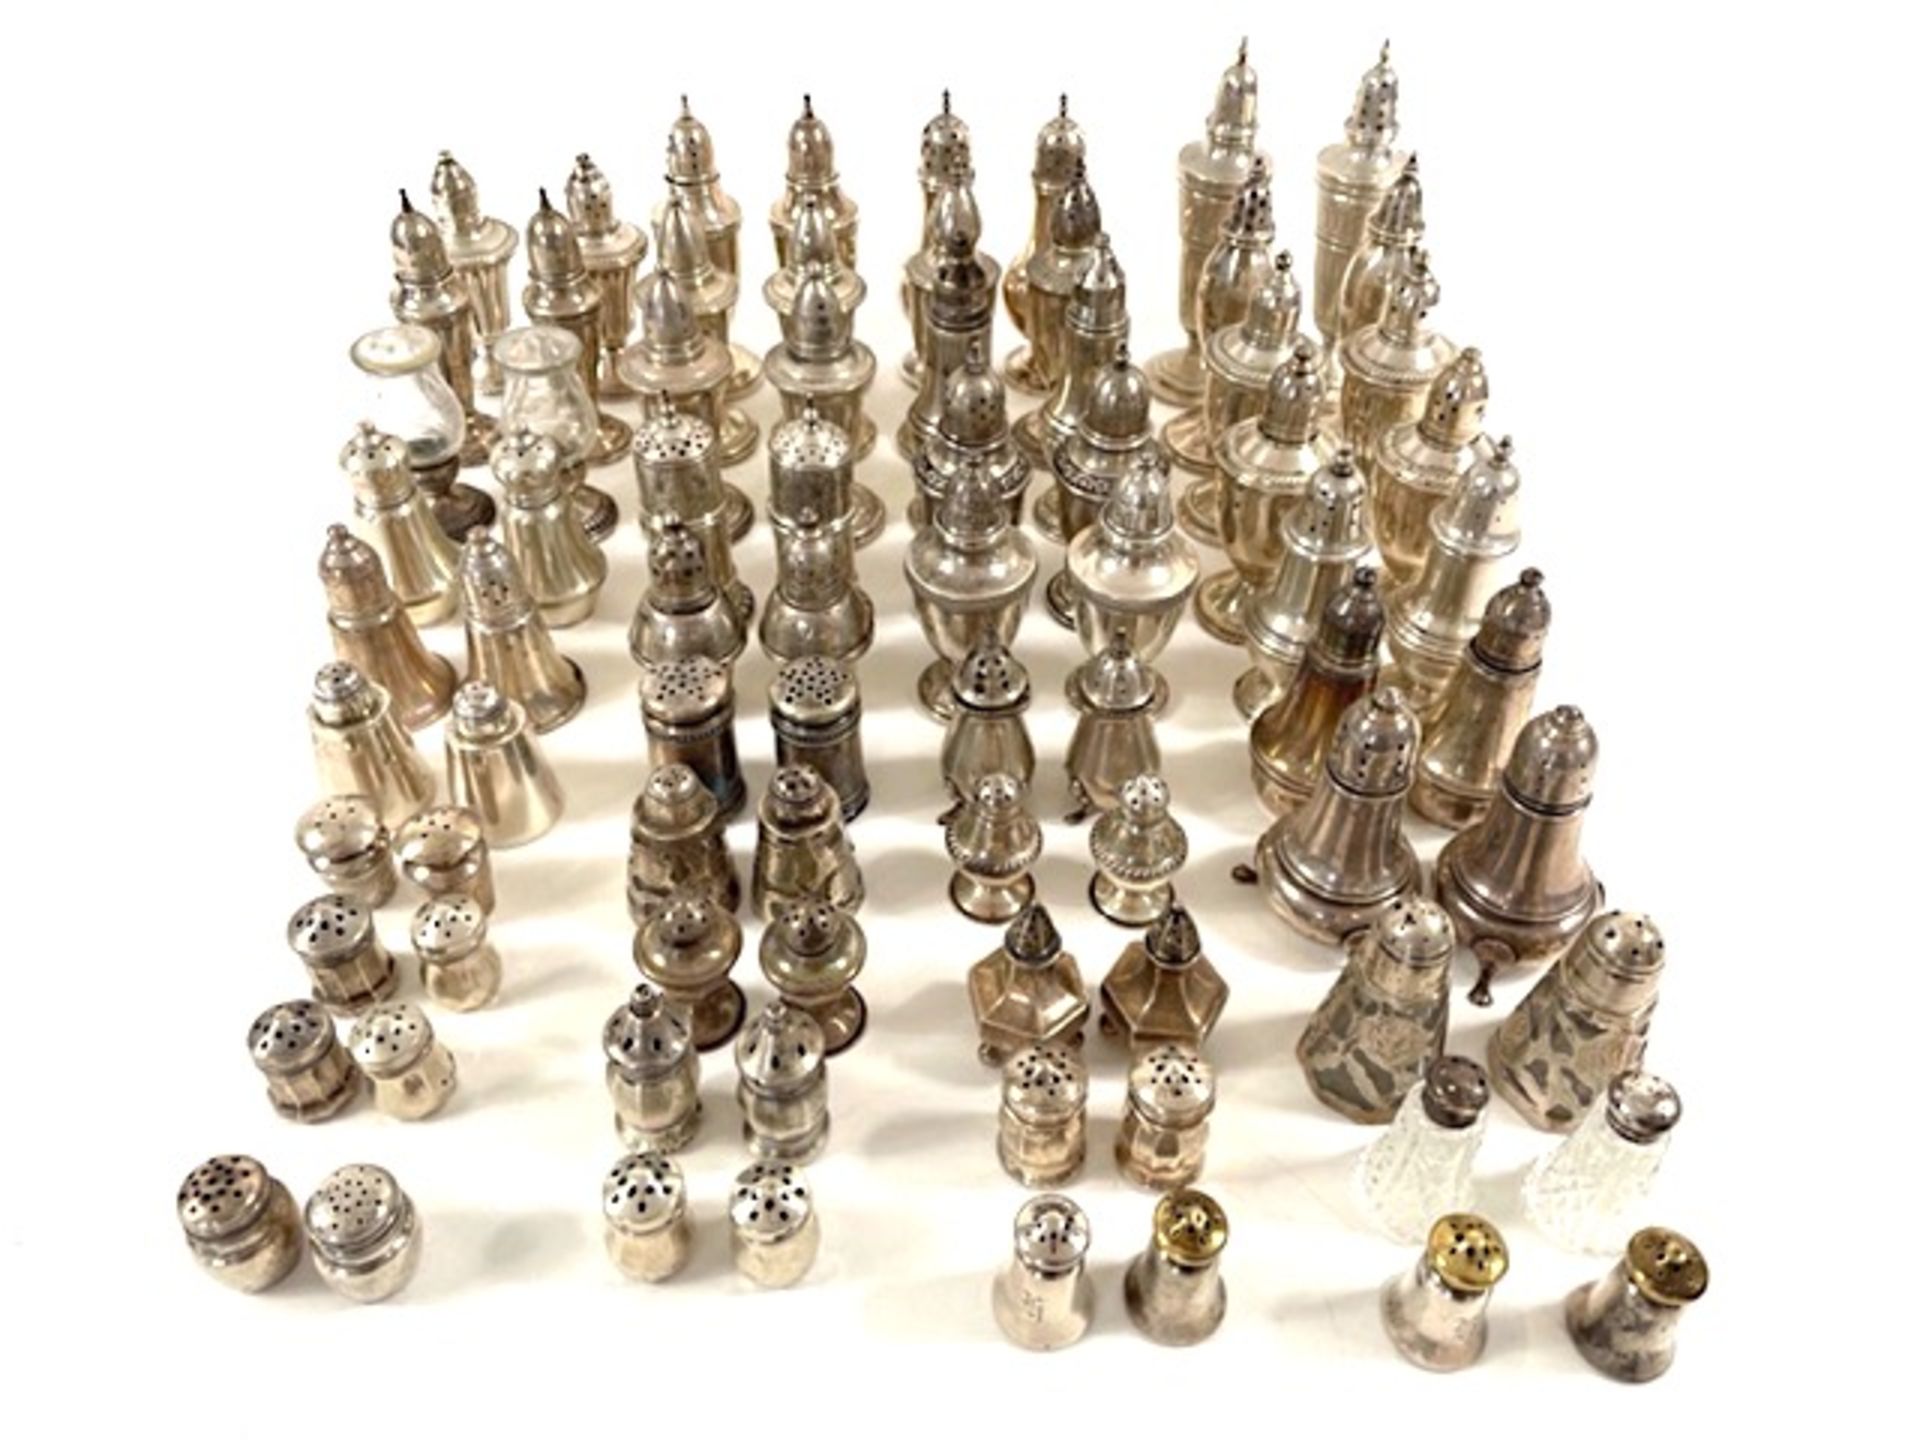 40 pairs of salt/pepper and spice shakers,